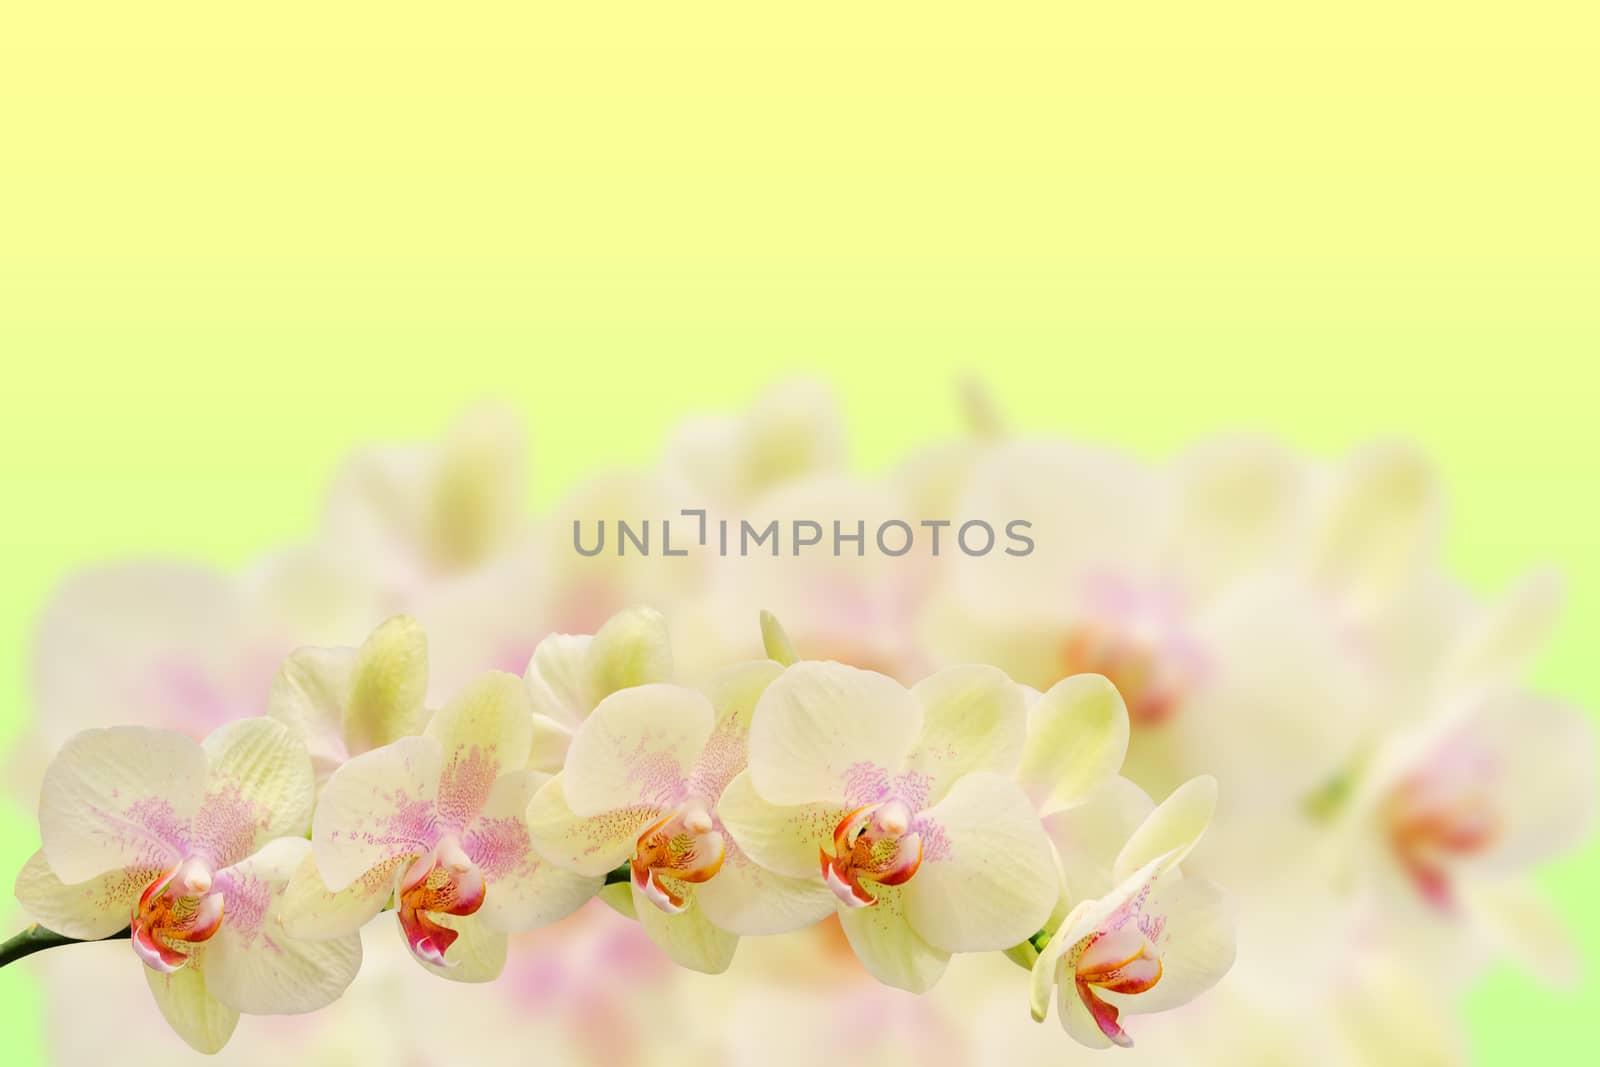 Delicate orchid branches on pastel colored gradient background with copyspace